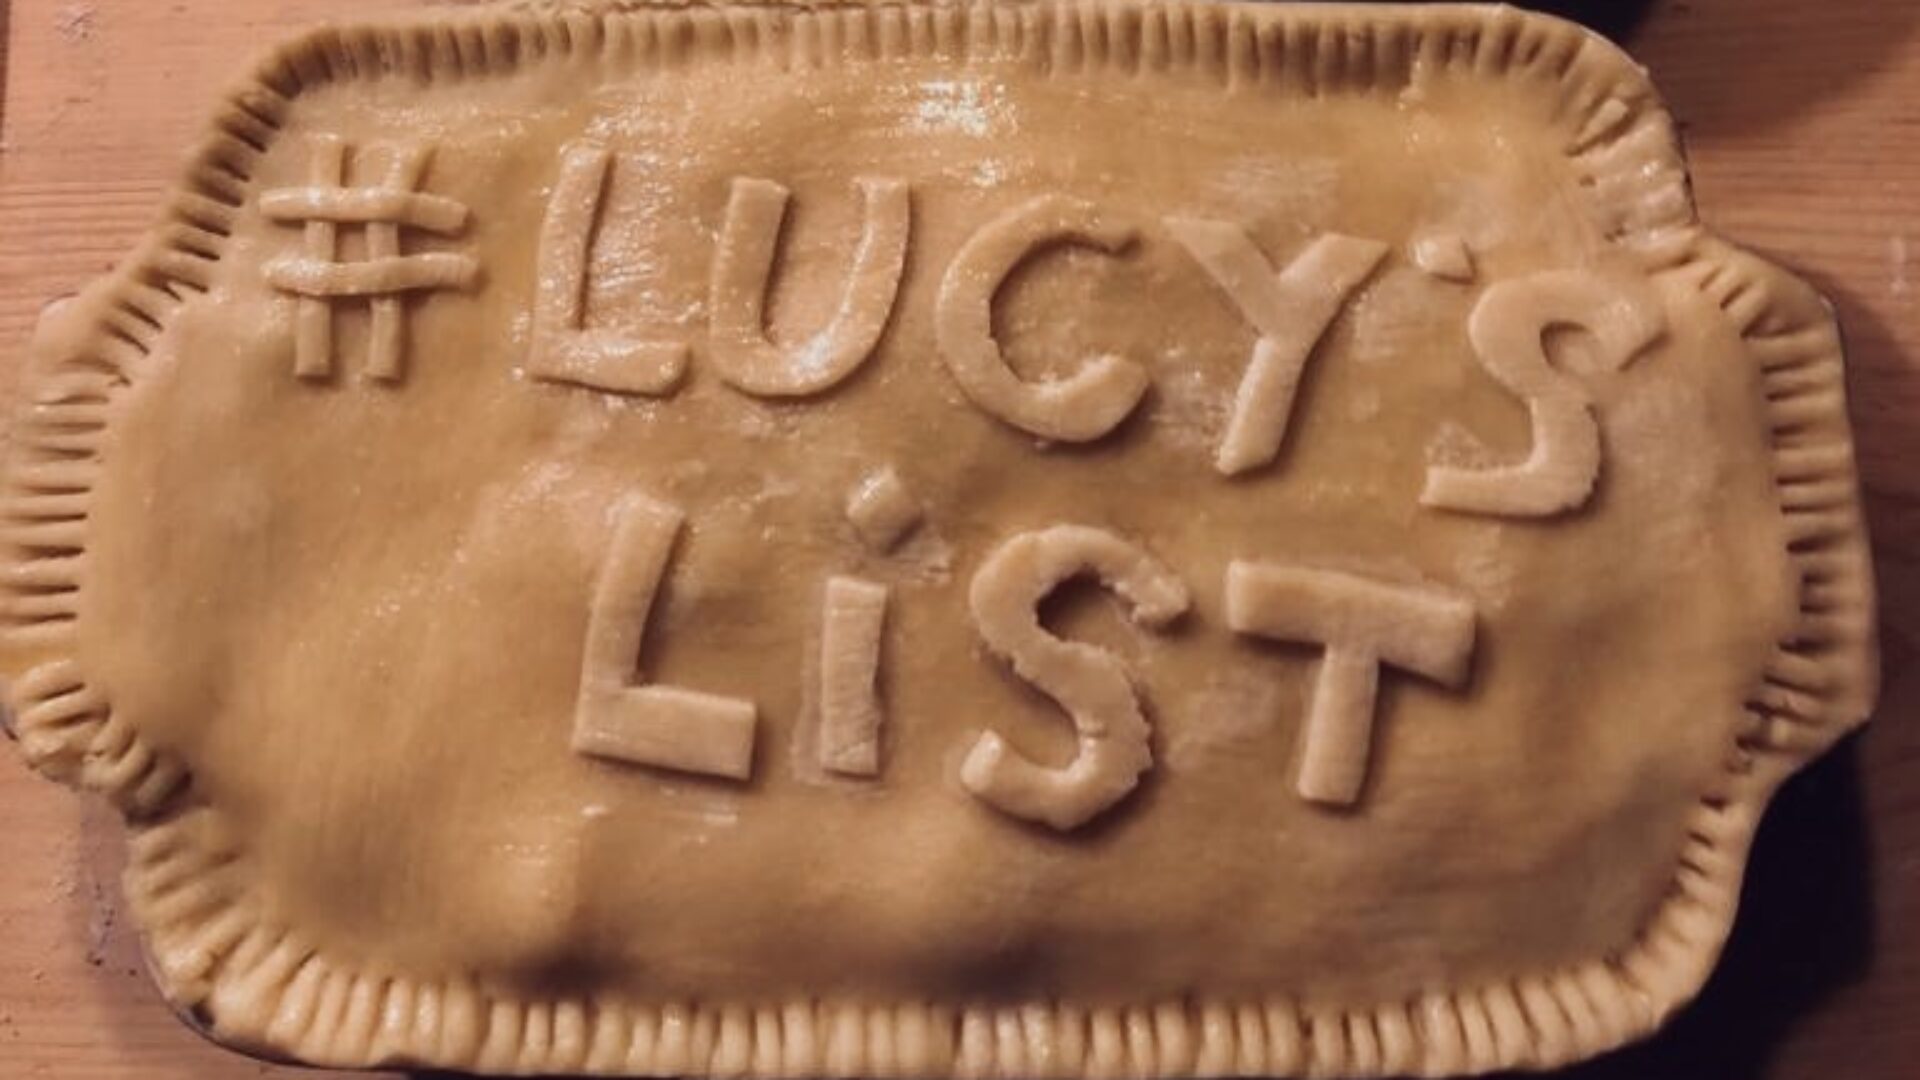 Two pies with "Eat More Pies" and "#Lucy's List" baked into the crusts.